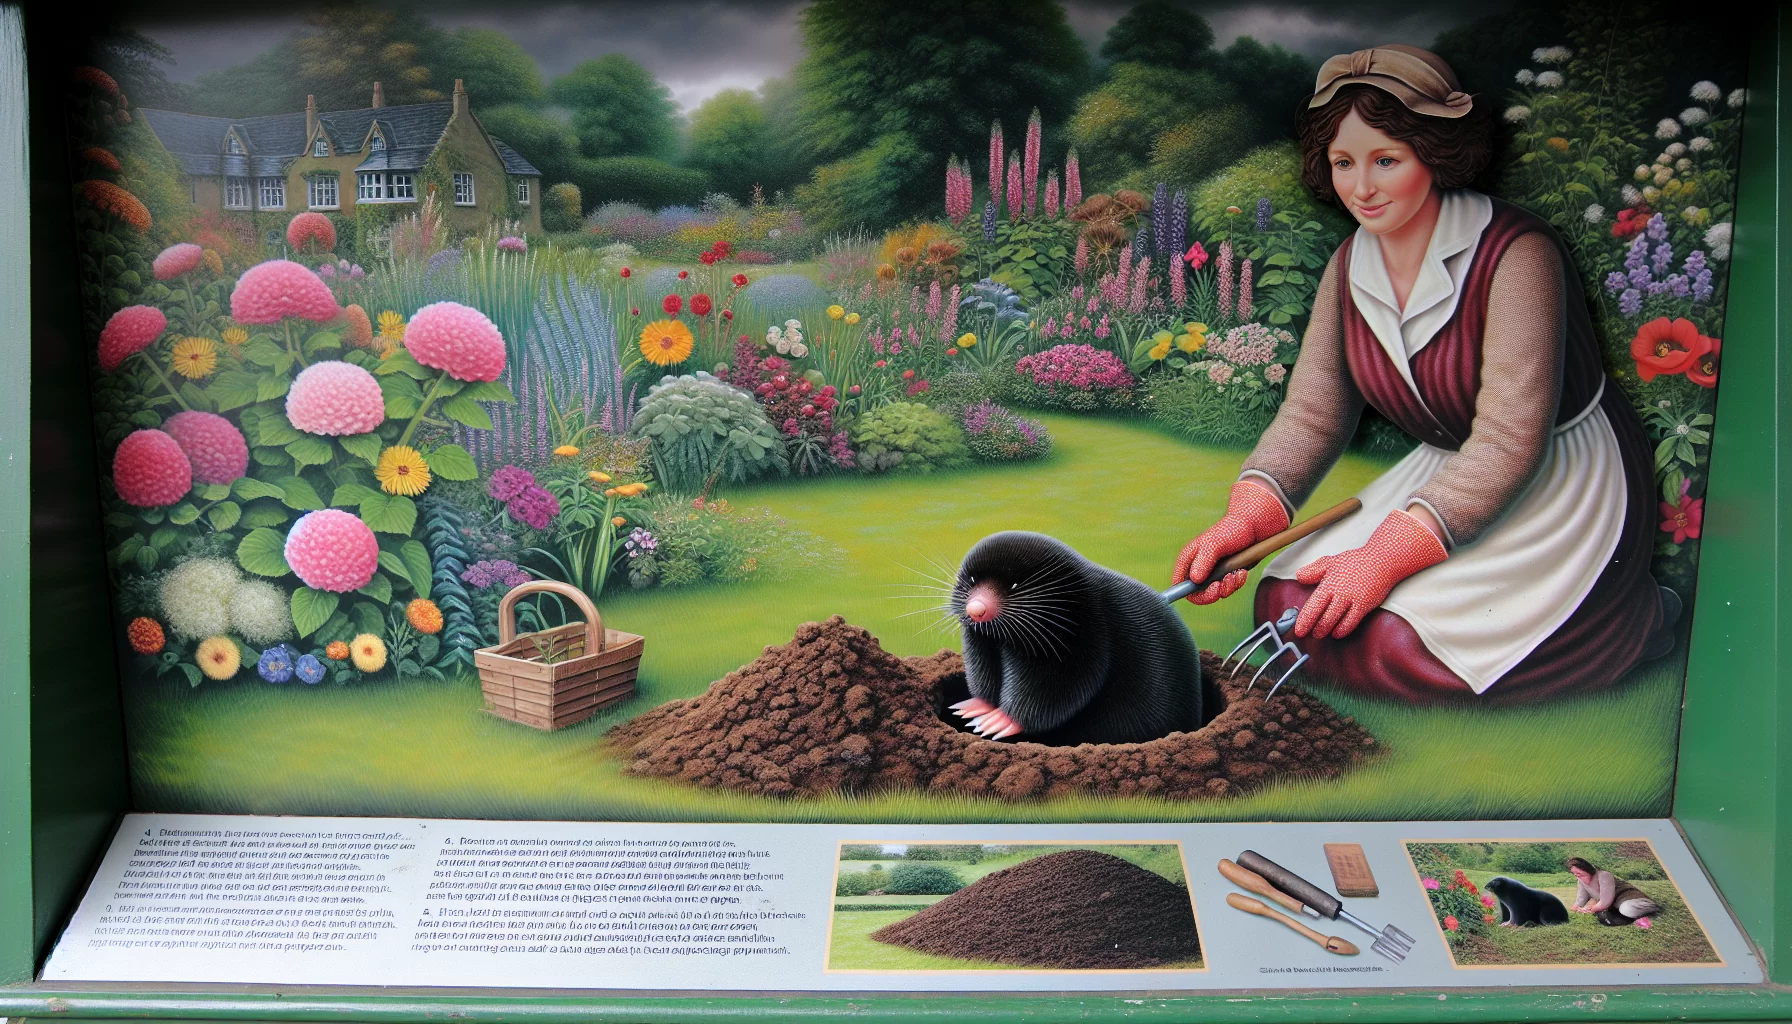 Understanding and managing garden moles ethically and effectively